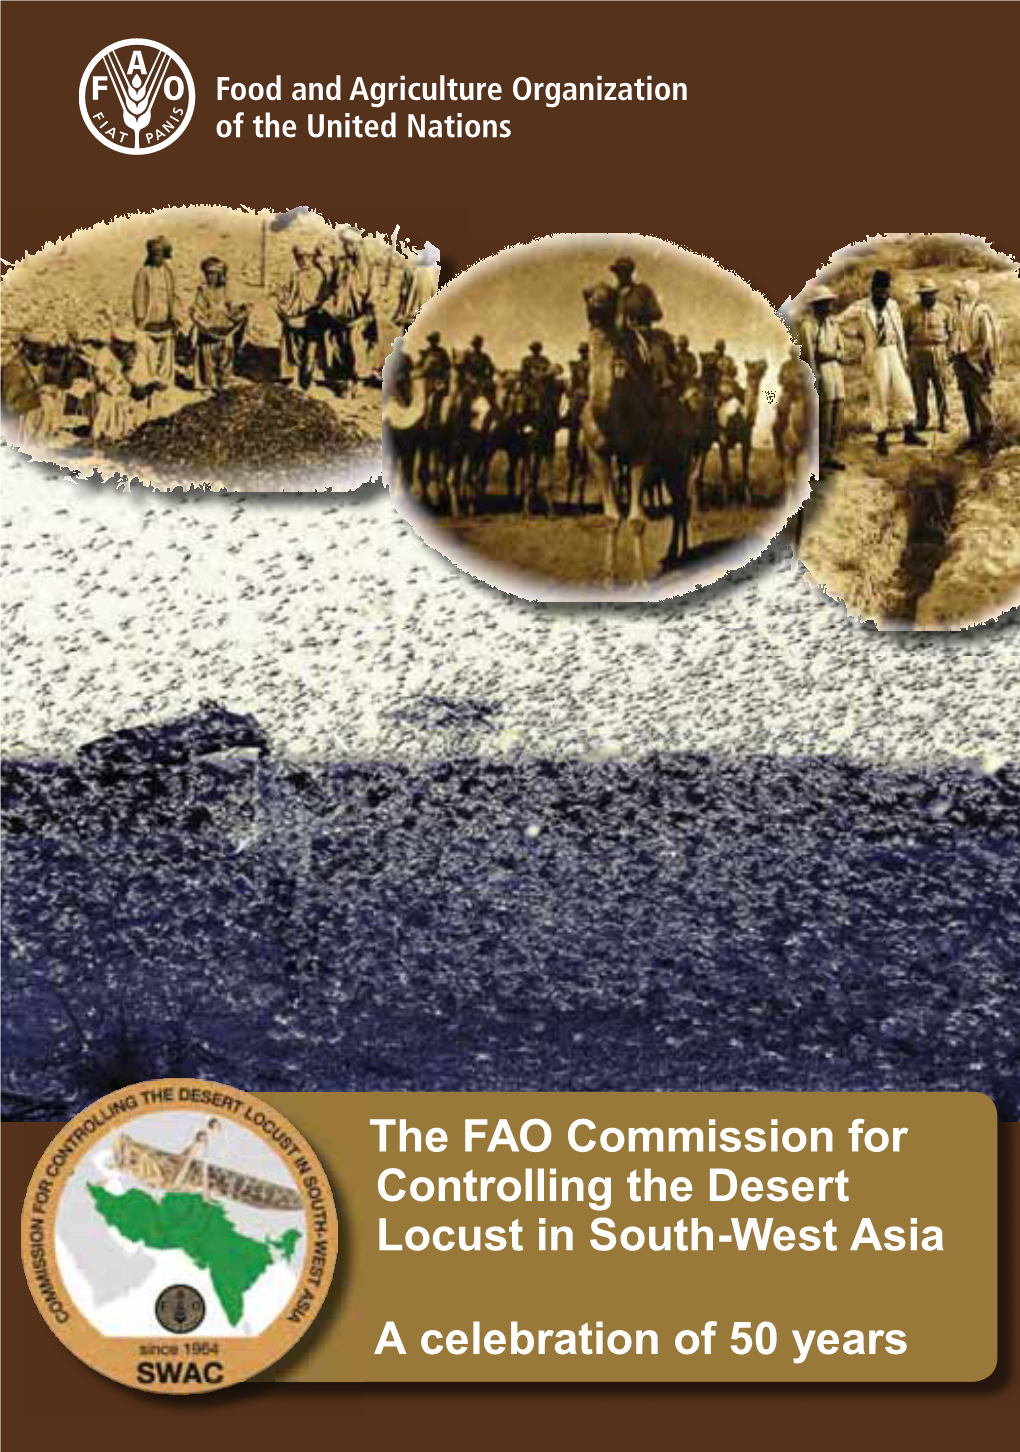 The FAO Commission for Controlling the Desert Locust in South-West Asia